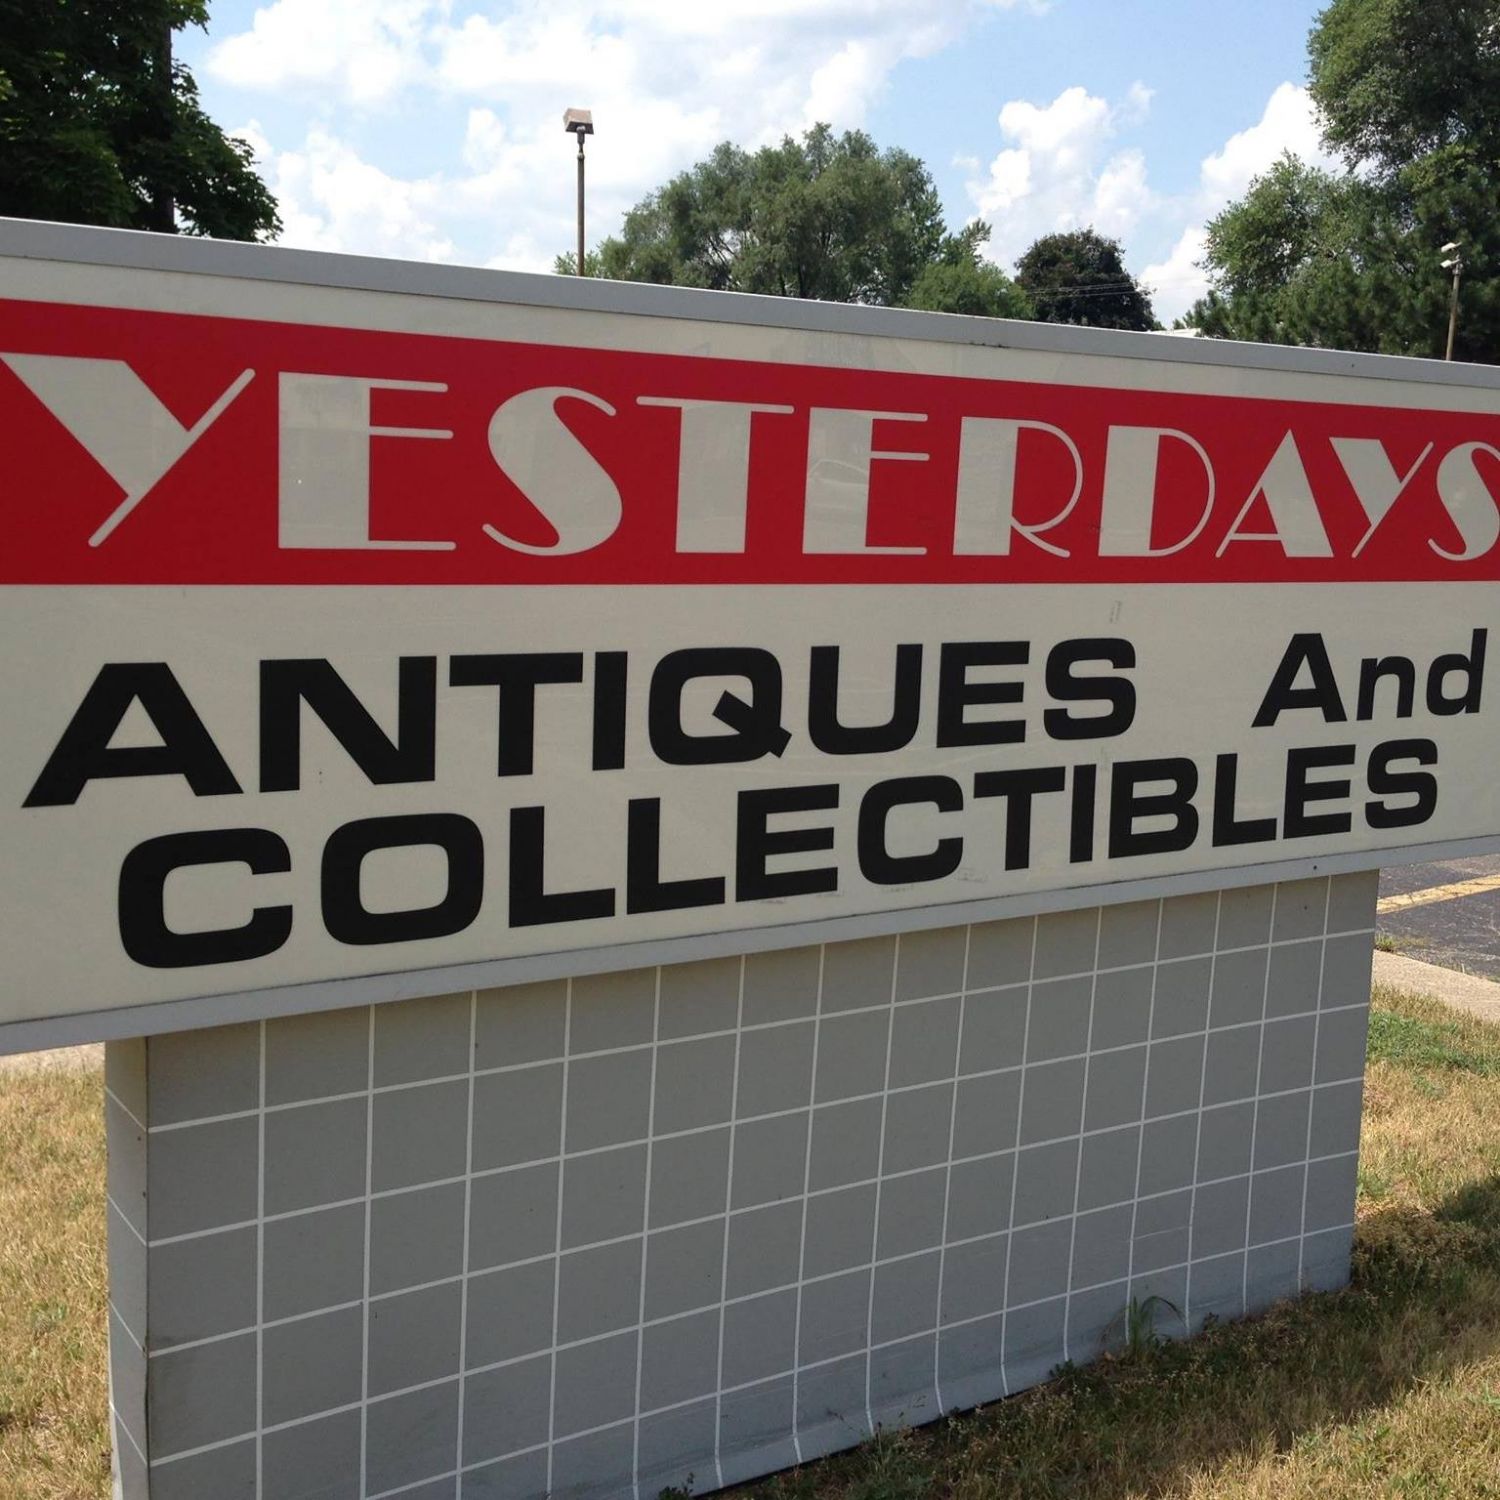 Yesterday's Antiques & Coins - Ravenswood, West Virginia 26164